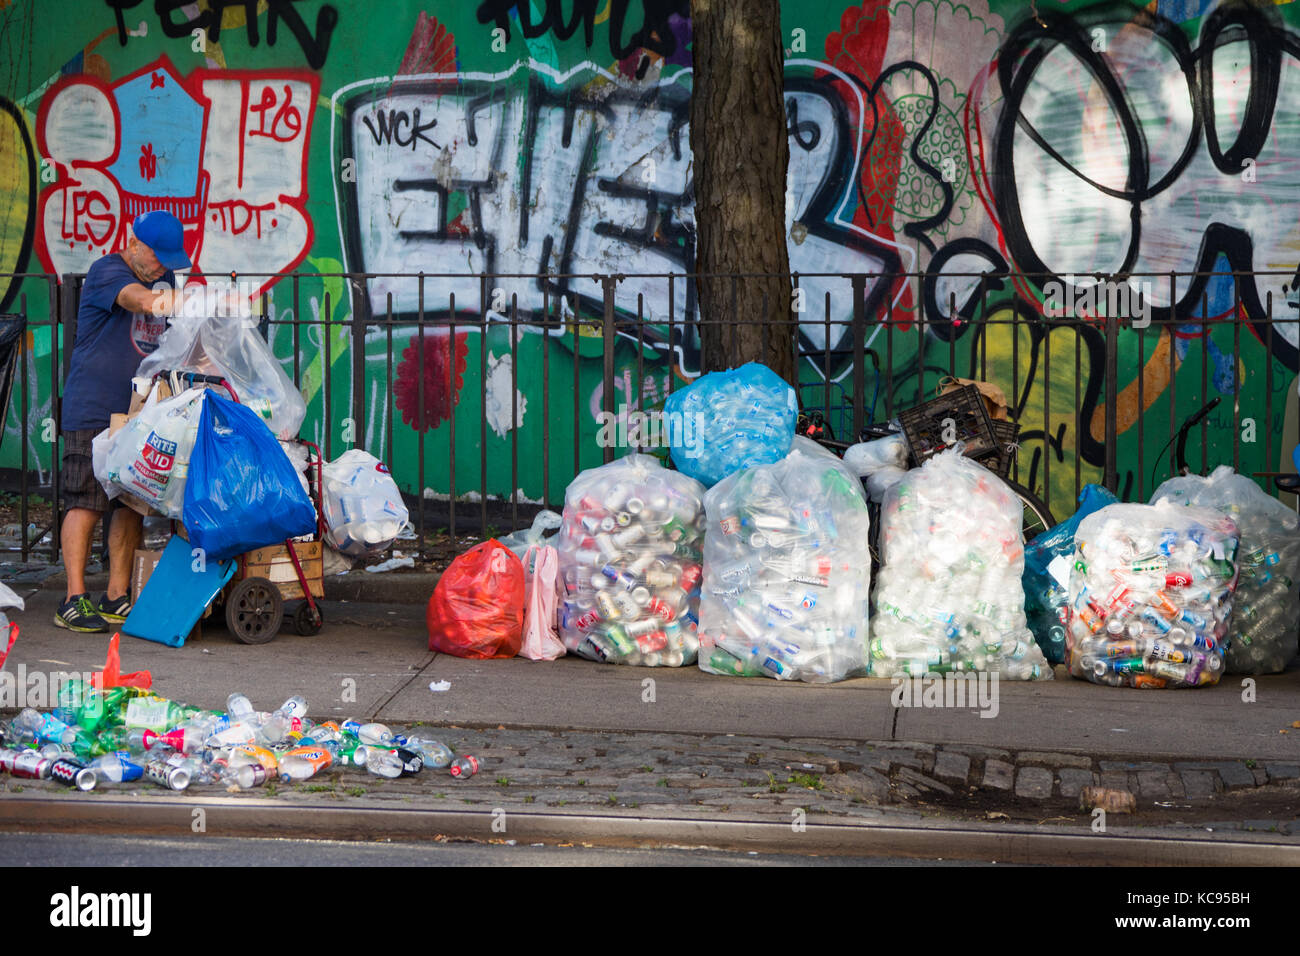 Pickers collecting recycled material, Chinatown, New York City, USA Stock Photo